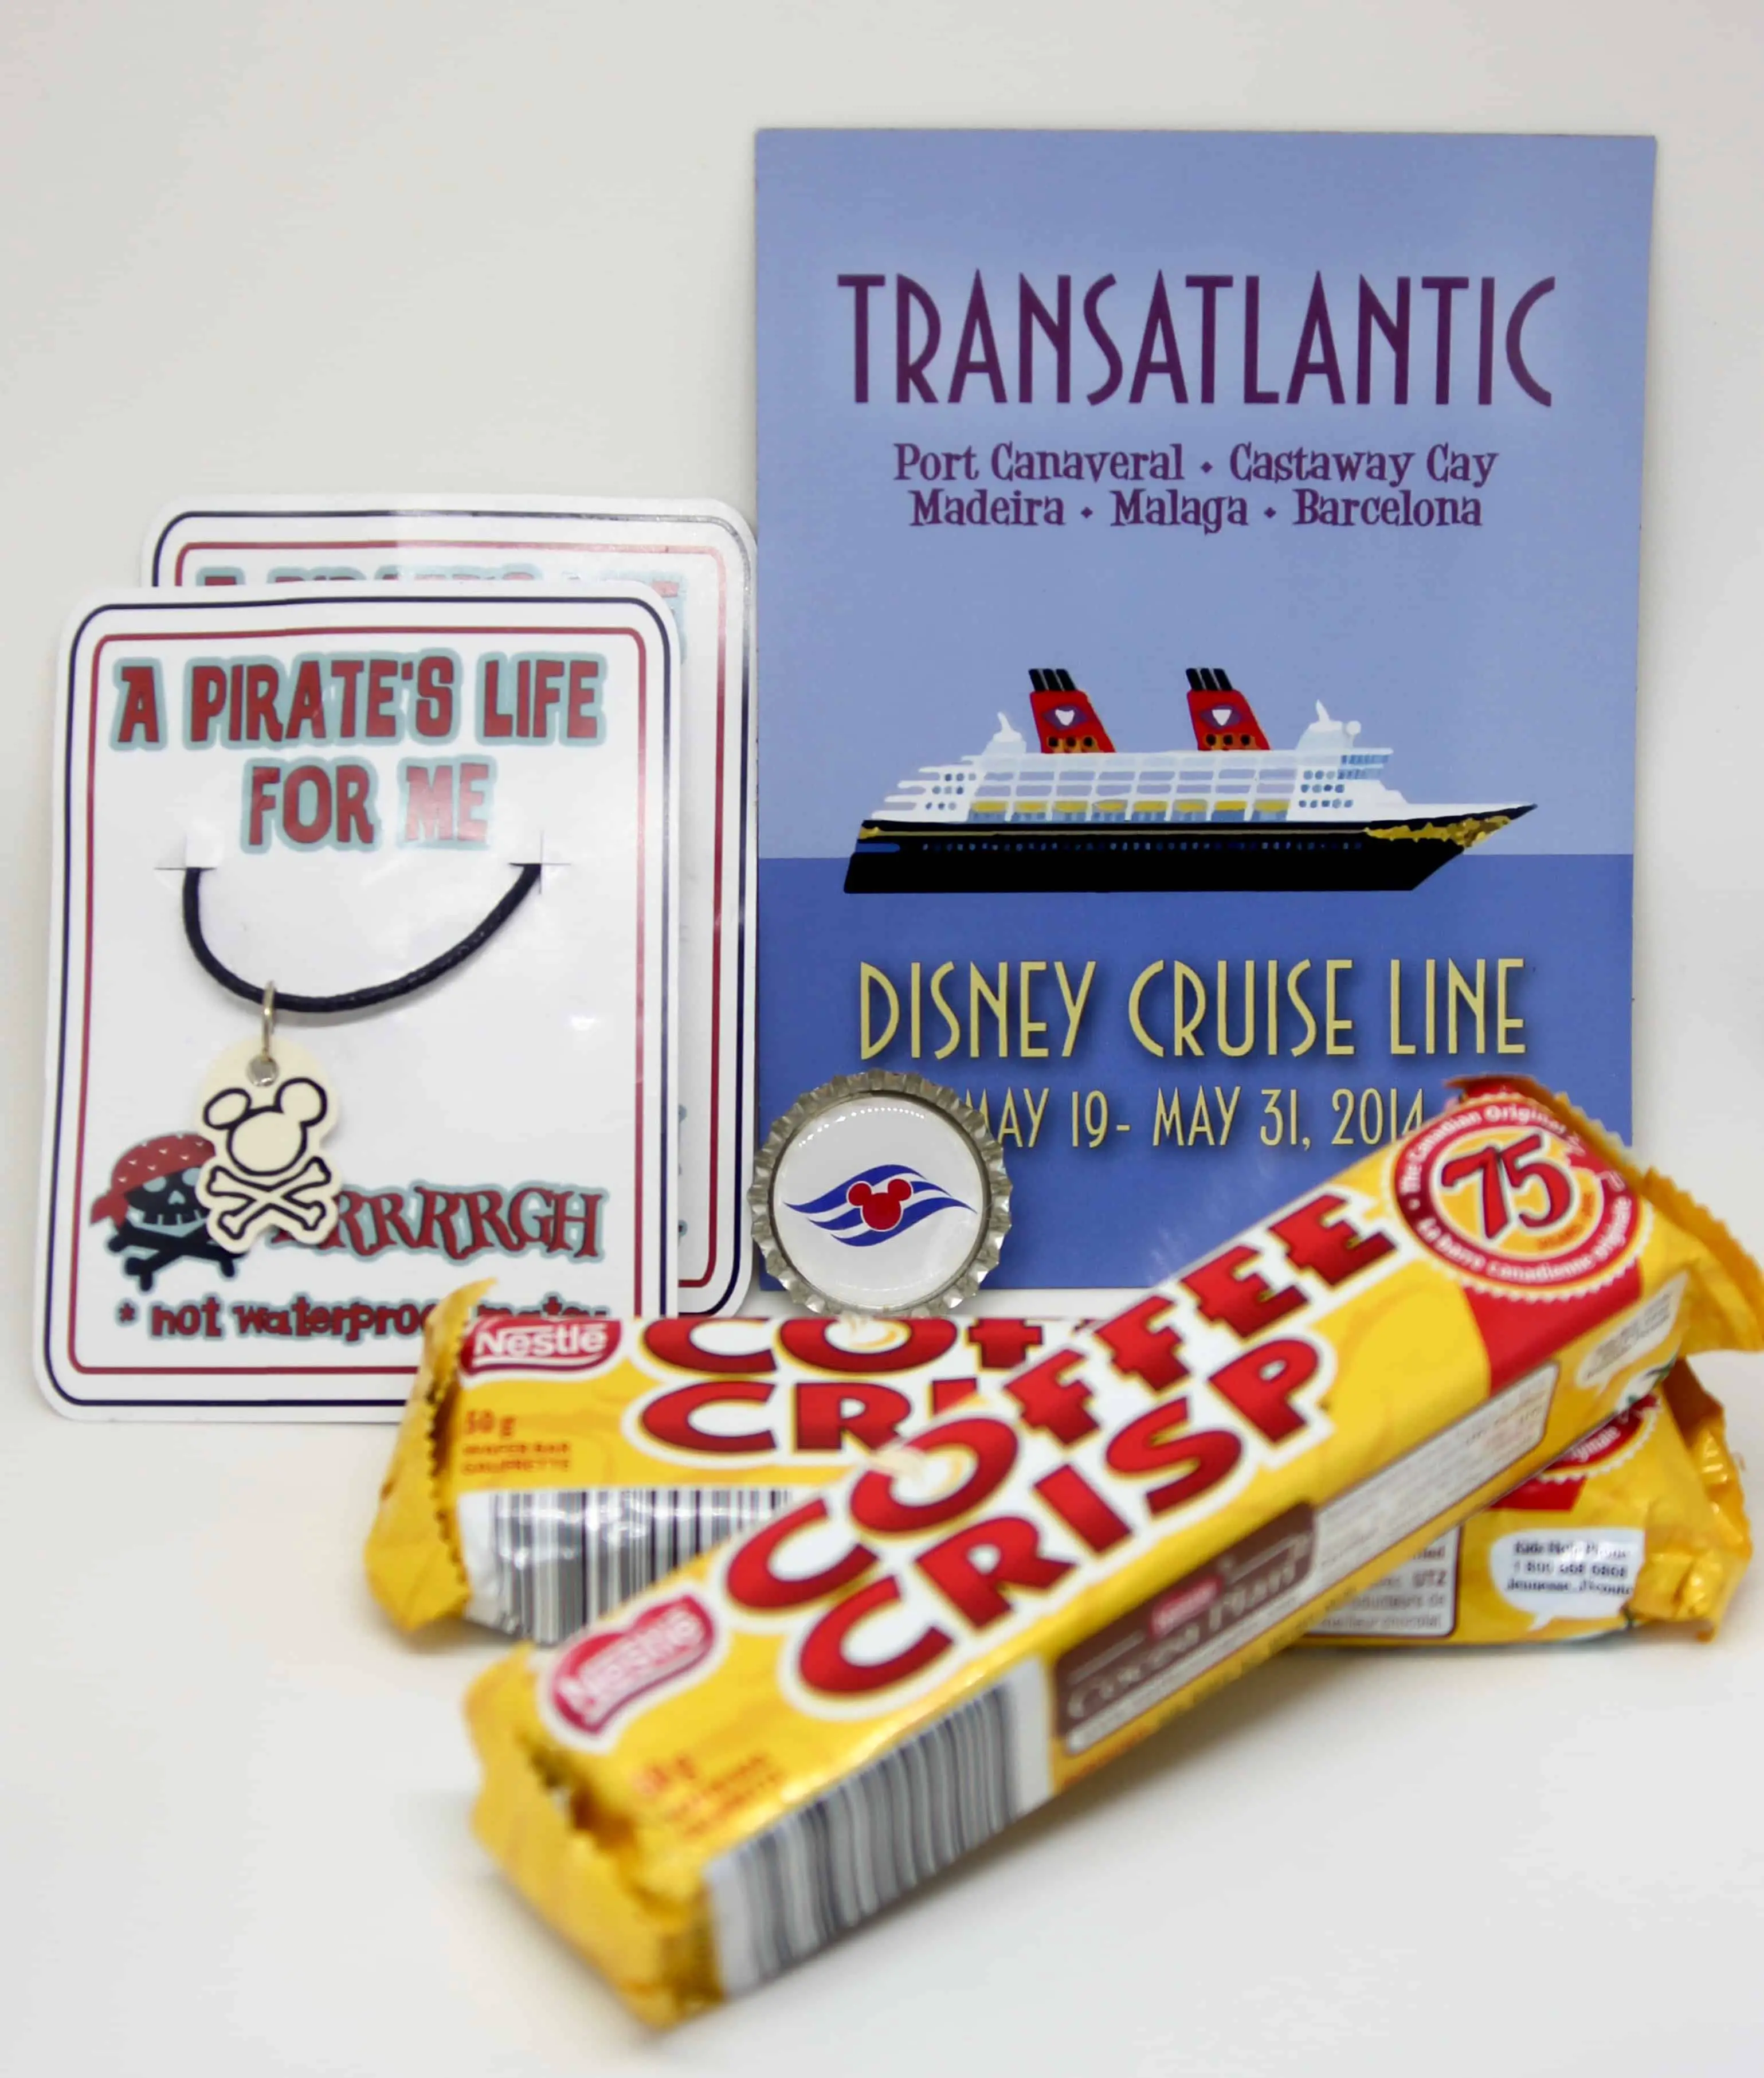 Disney Cruise Fish extender gifts